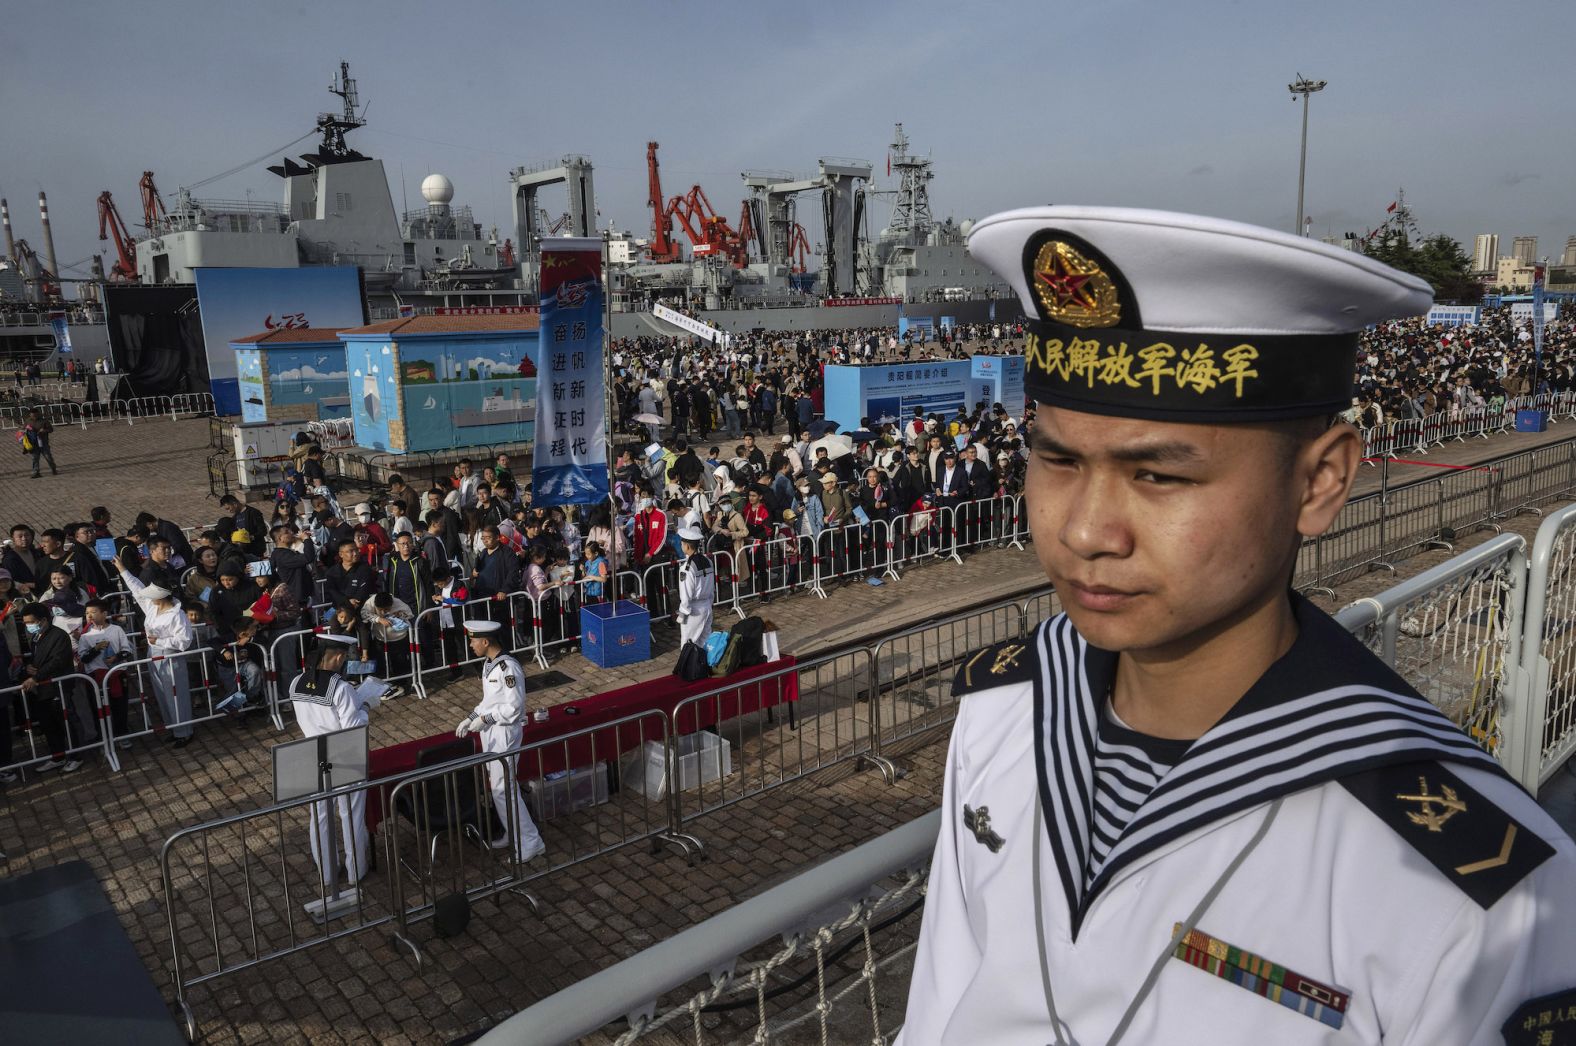 A sailor stands on the deck of the Guyiyang destroyer as members of the public line up to visit the ship in Qingdao, China, on Saturday, April 20. China was marking the 75th anniversary of the country's navy.